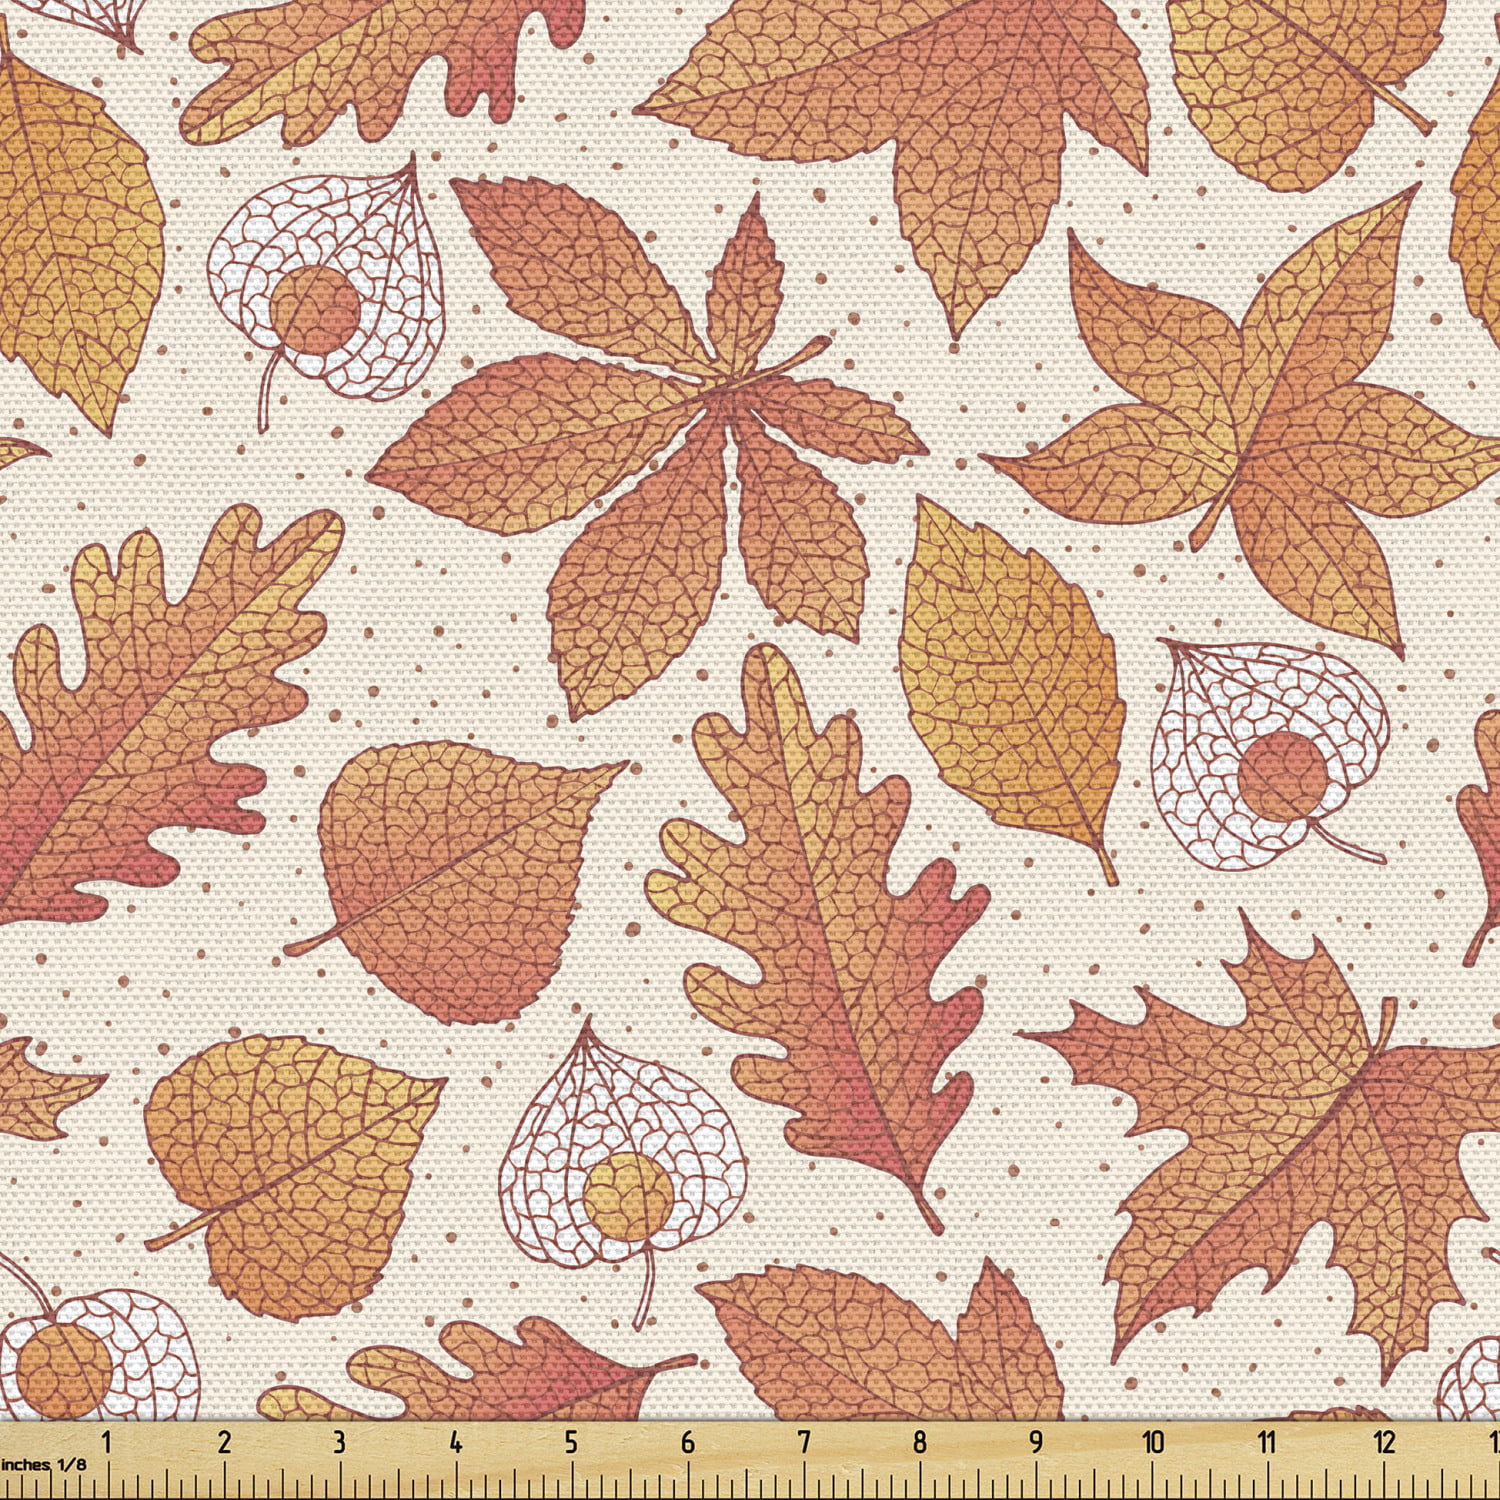 Autumn Fabric by the Yard Upholstery, Oak Poplar Beech Maple Aspen and  Horse Chestnut Leaves, Decorative Fabric for DIY and Home Accents,  Champagne Dark Salmon by Ambesonne